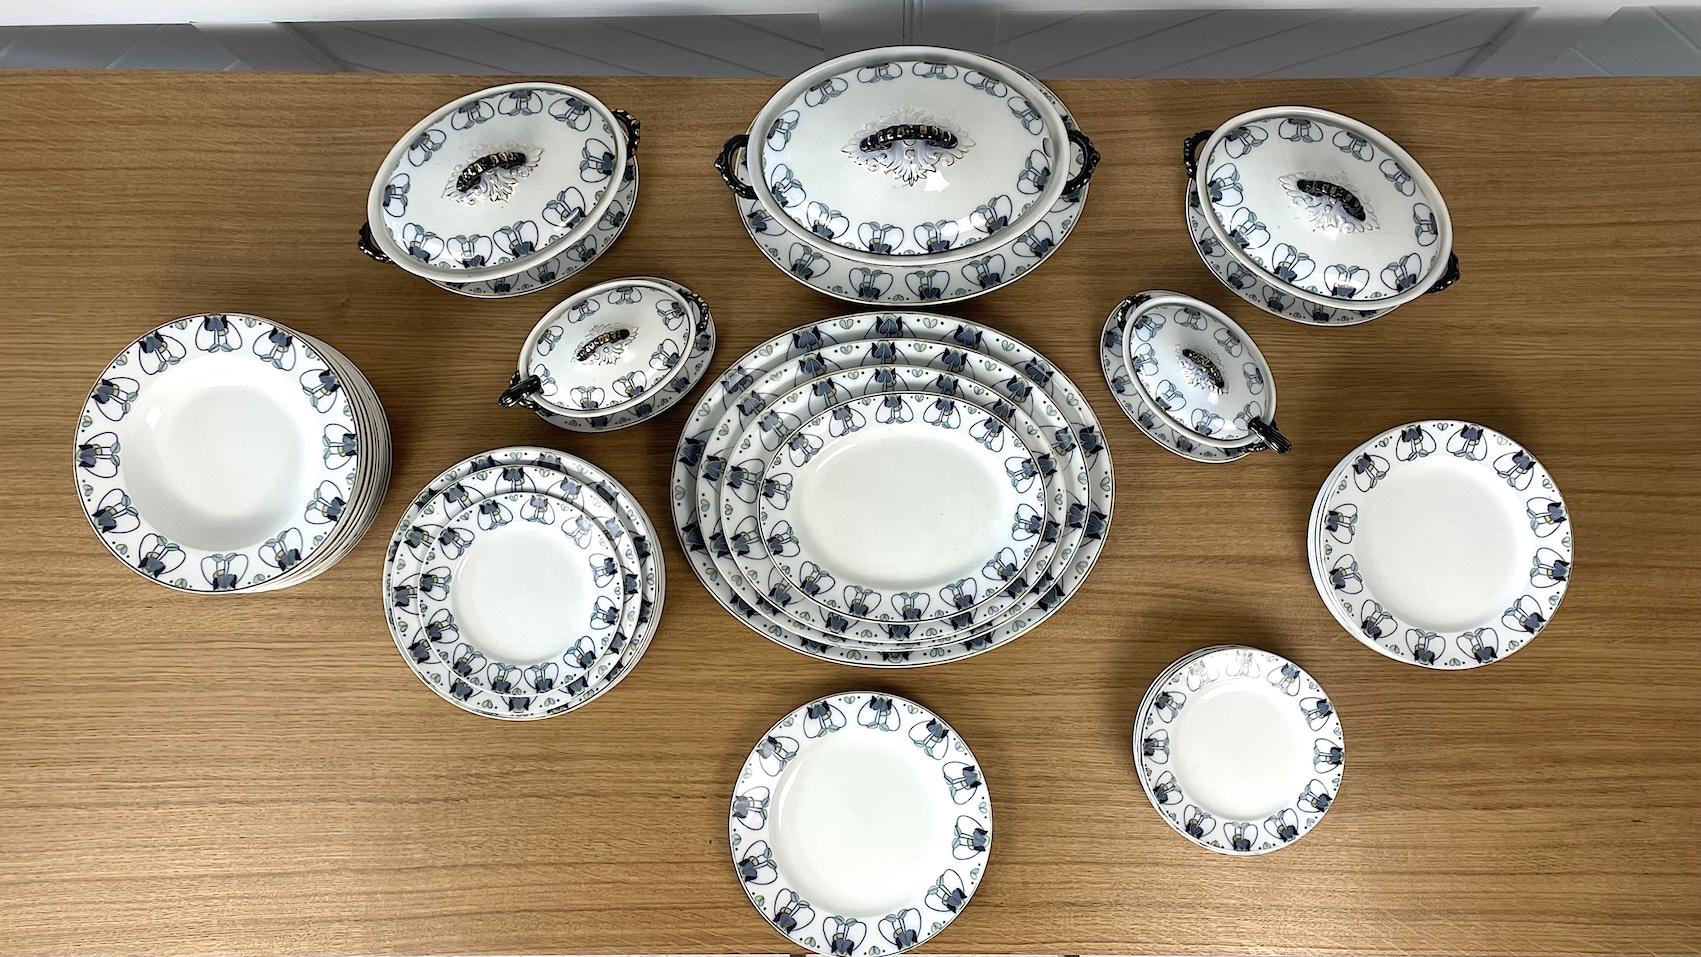 GLASGOW SCHOOL 12 place china dinner service

With stylised tulip design pattern

‘Tulip Ware’

Designed by George Logan

Made by Keeling & Co, Burselem Rd N 36378

Circa 1900

Consisting:

12 large dinner plates (diameter 26cm)

12 medium dinner